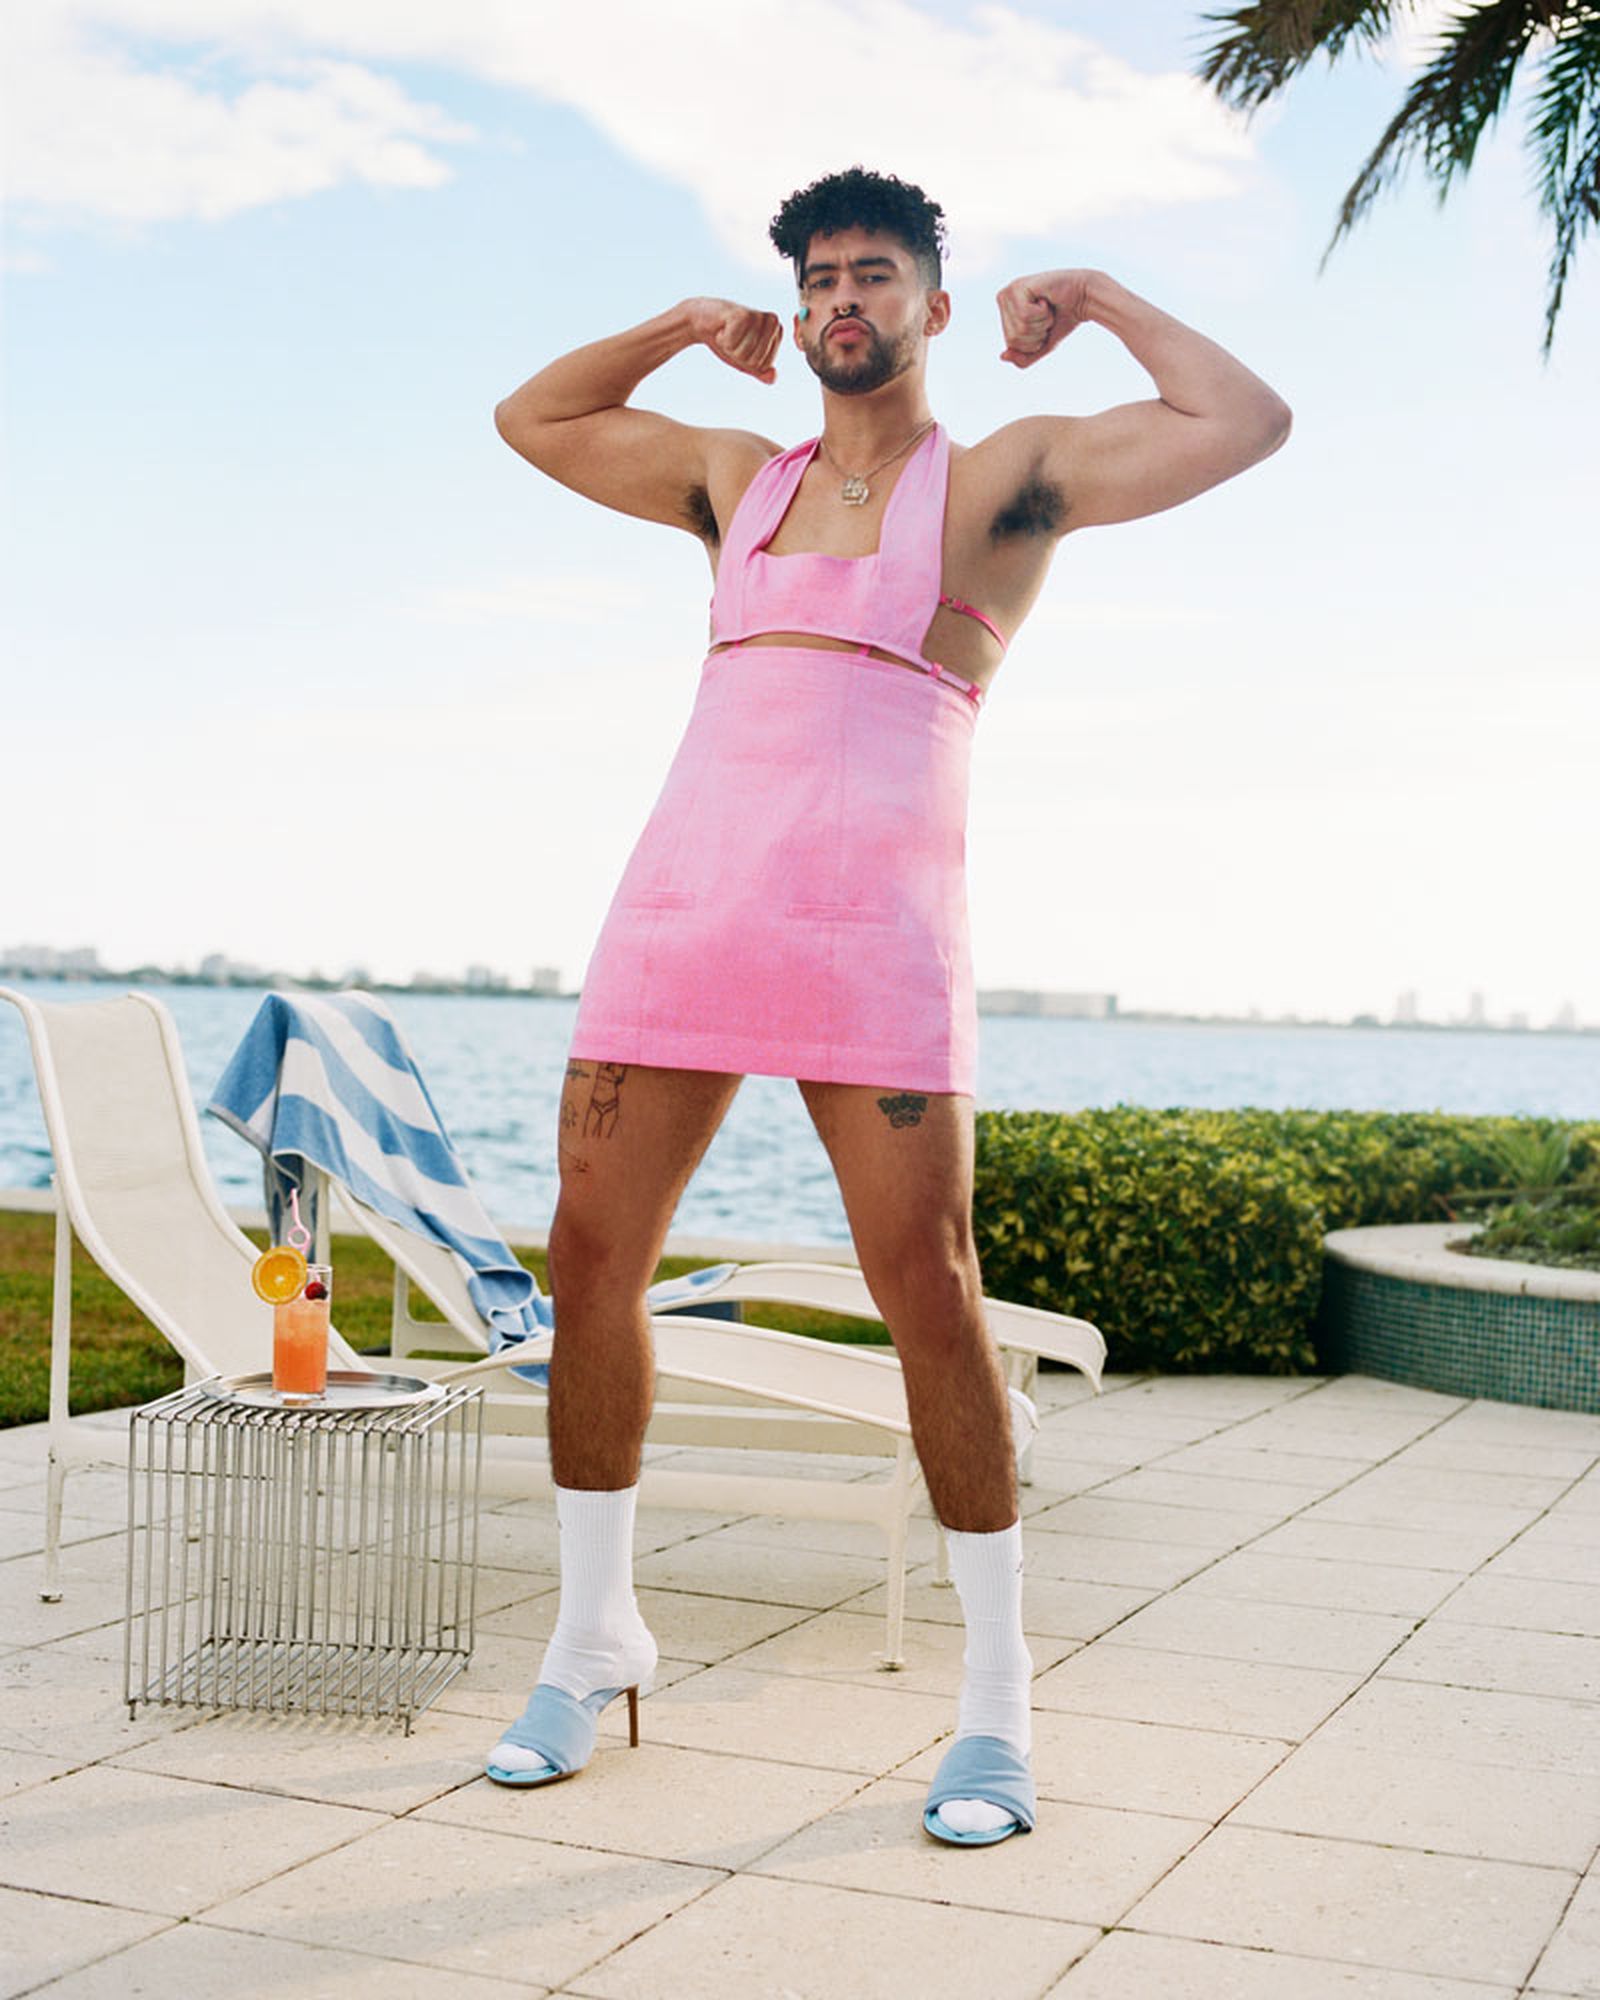 Photos from Bad Bunny's Best Fashion Moments